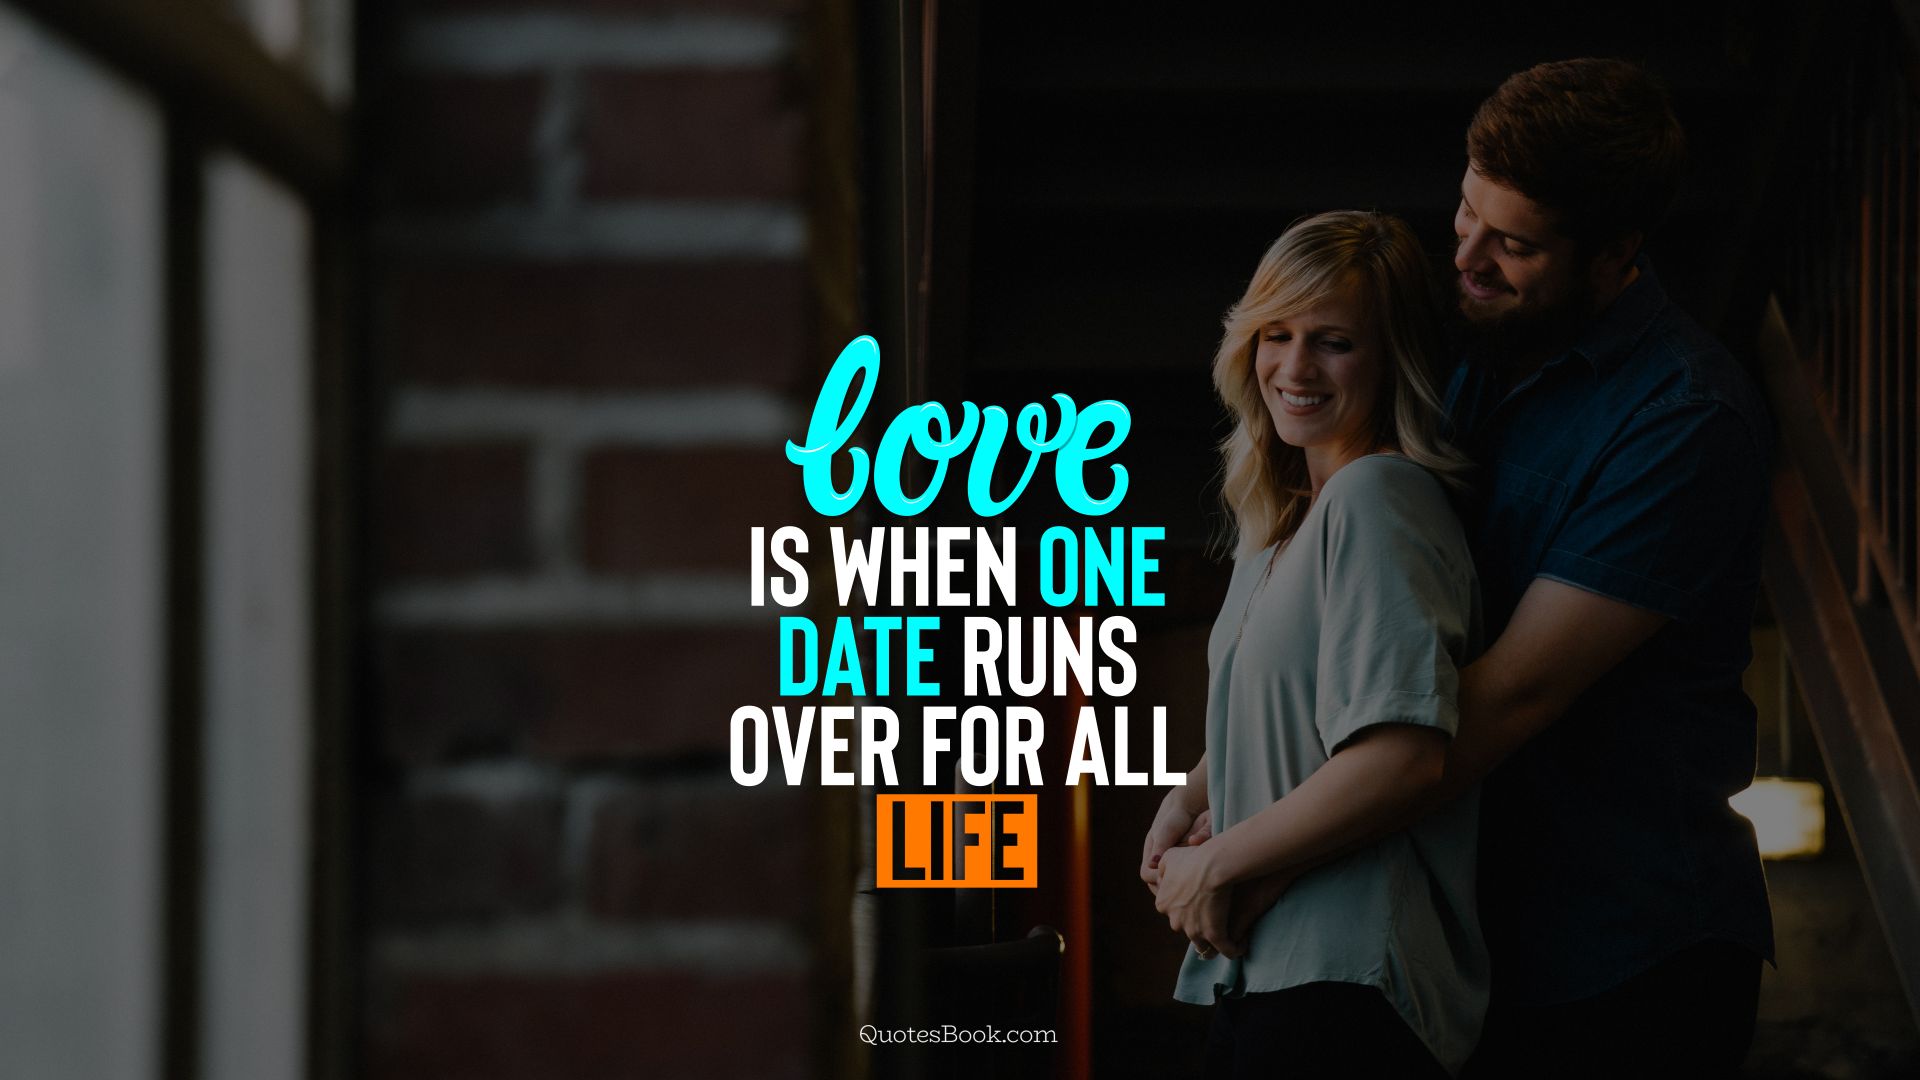 Love is when one date runs over for all life. - Quote by QuotesBook